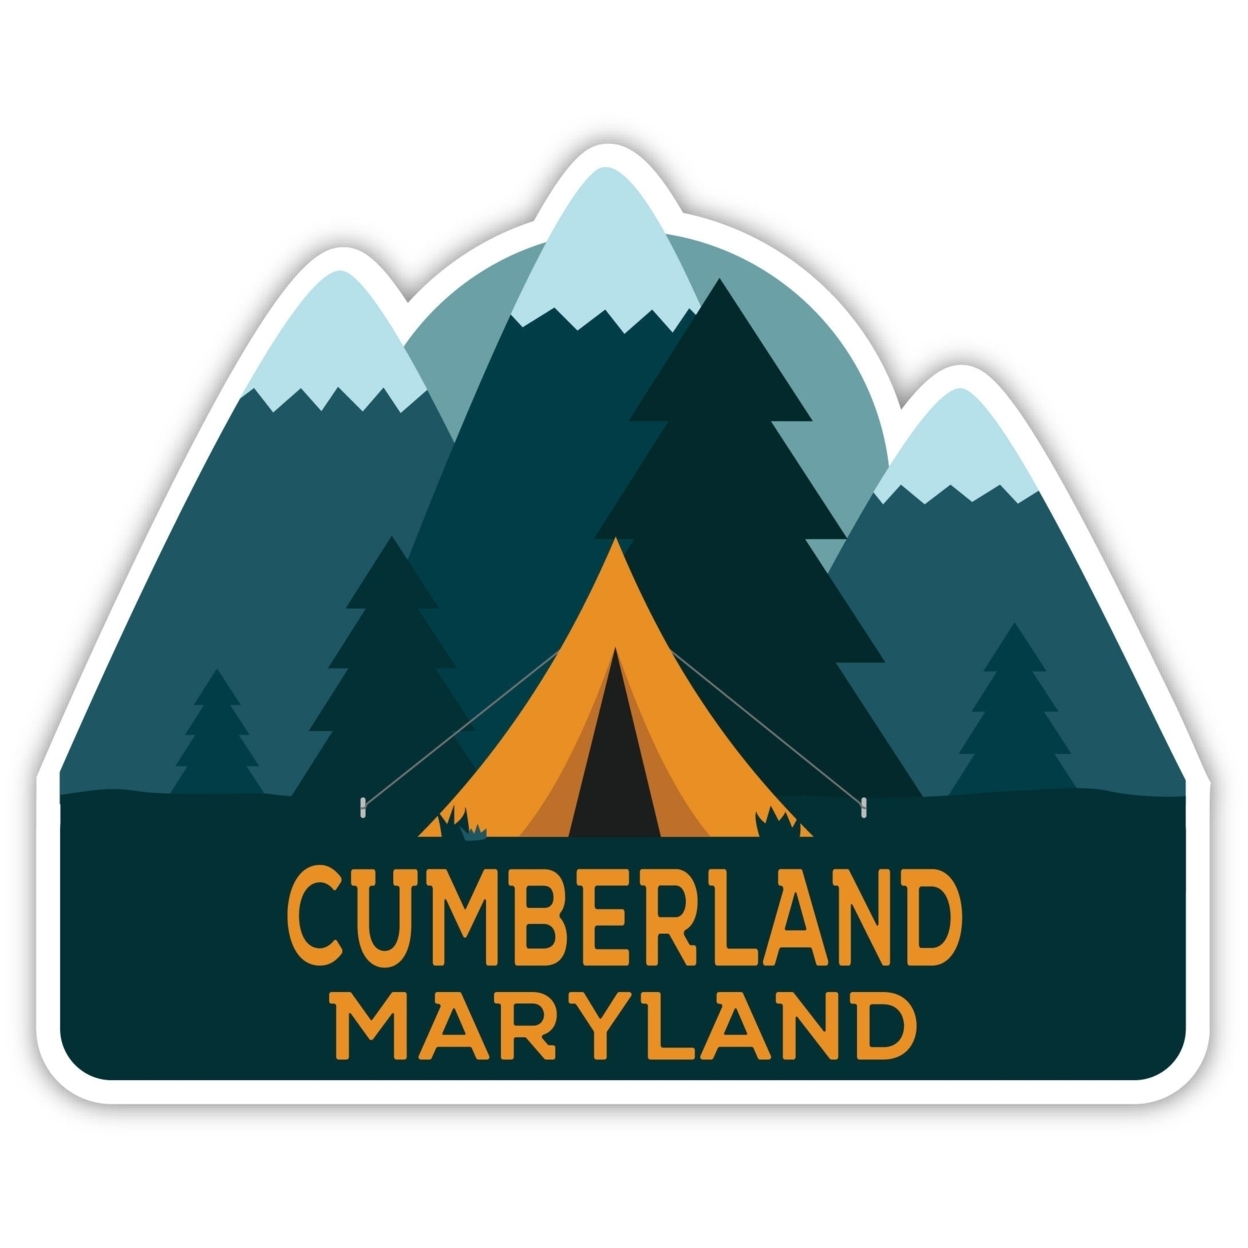 Cumberland Maryland Souvenir Decorative Stickers (Choose Theme And Size) - Single Unit, 8-Inch, Tent